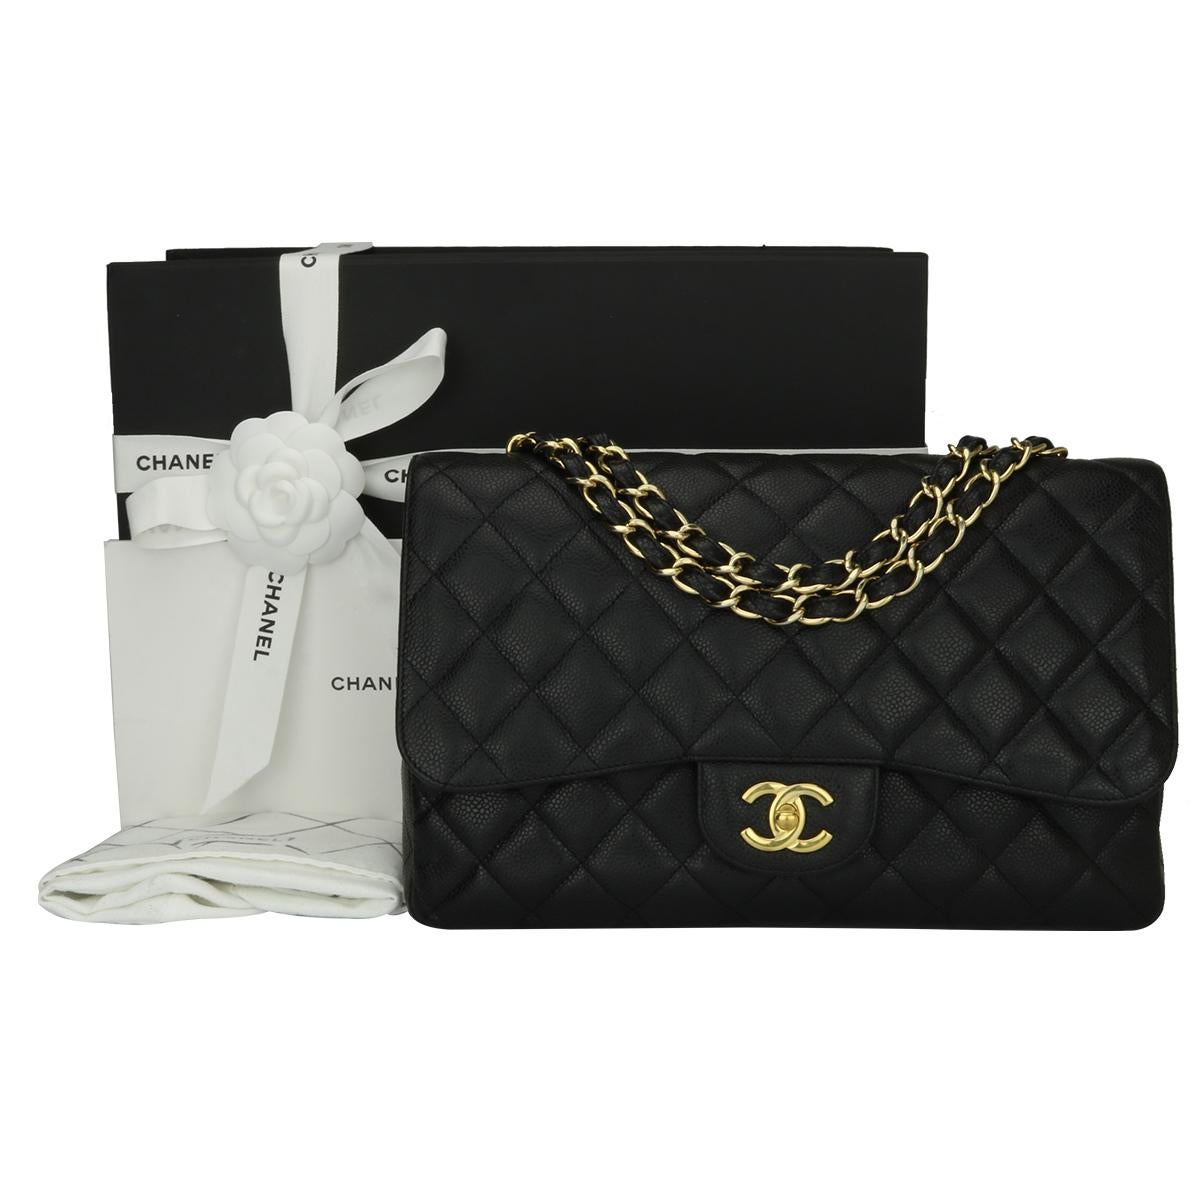 Authentic CHANEL Classic Single Flap Jumbo Black Caviar with Gold Hardware 2009.

This stunning bag is in a great condition, the bag still holds its shape very well and the hardware is still very shiny.

Exterior Condition: Excellent condition,